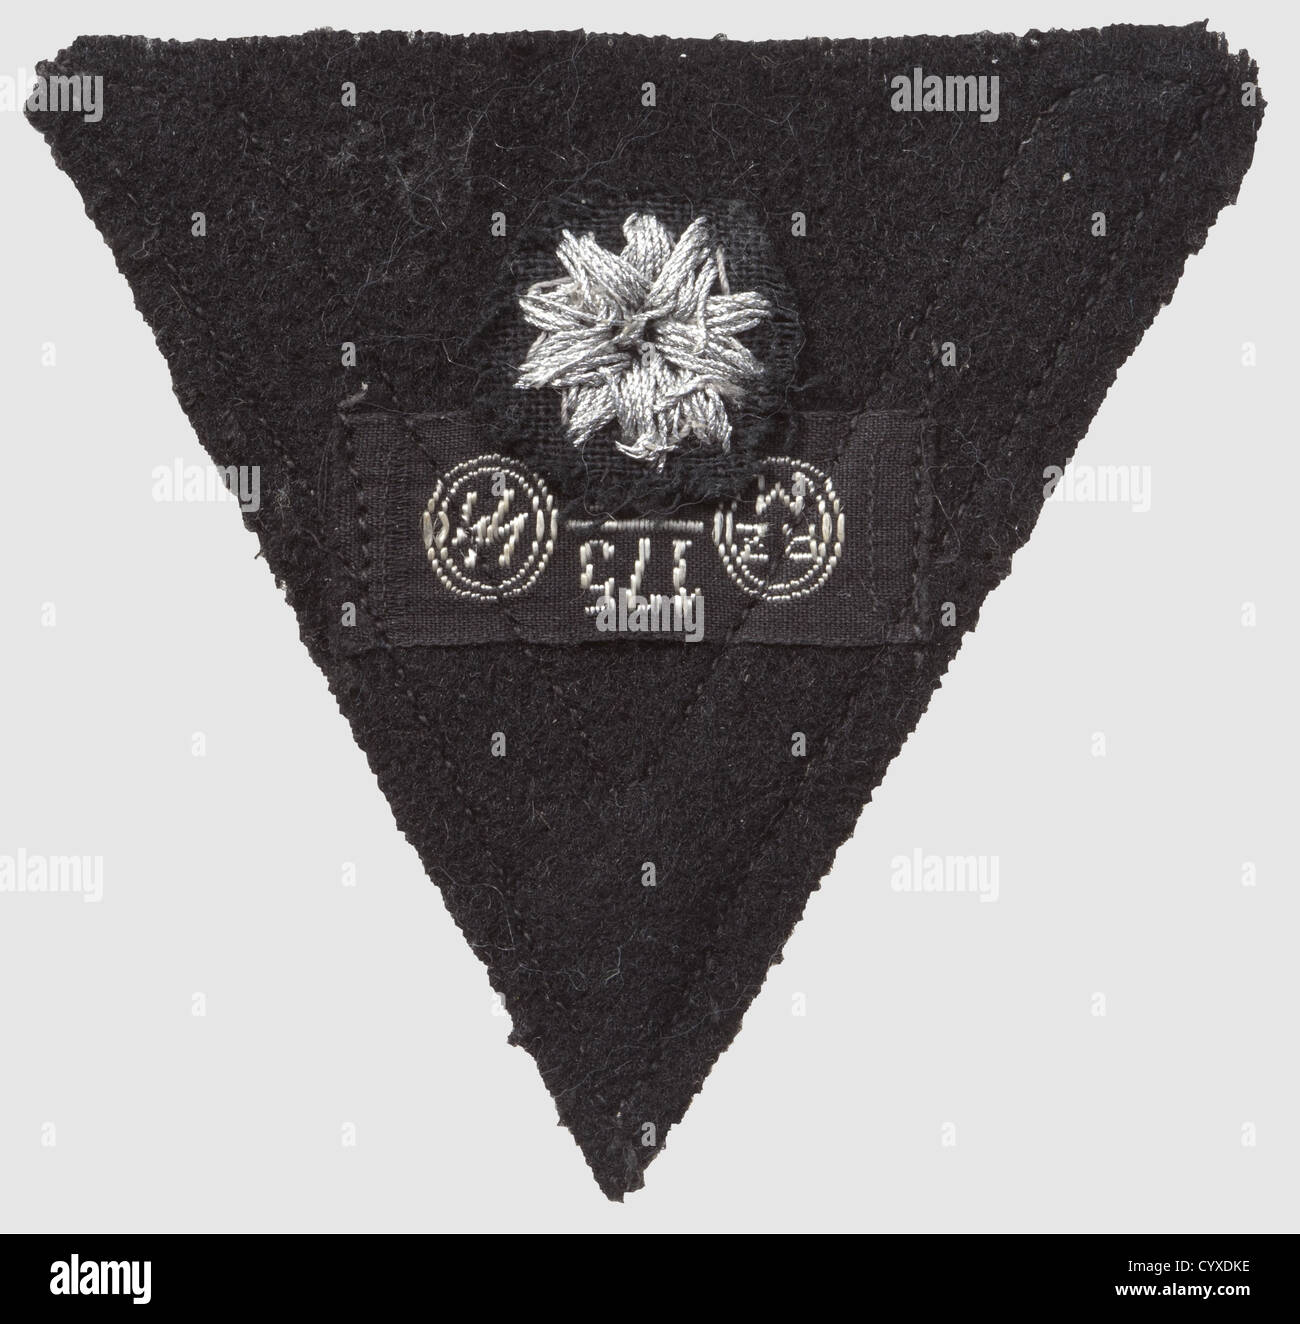 Chevron for 'Old Campaigners', for a member who previously served in Wehrmacht or police. Silver lace and hand-embroidered star on black cloth, on the back RZM-label 'RZM 175/36 SS', historic, historical, 1930s, 1930s, 20th century, SS, Schutzstaffel, NS, National Socialism, Nazism, Third Reich, German Reich, branch of service, branches of service, organisation, organization, organizations, organisations, object, objects, clipping, cut out, cut-out, cut-outs, insignia, symbol, symbols, equipment, uniform, uniforms, detail, details, Additional-Rights-Clearences-Not Available Stock Photo